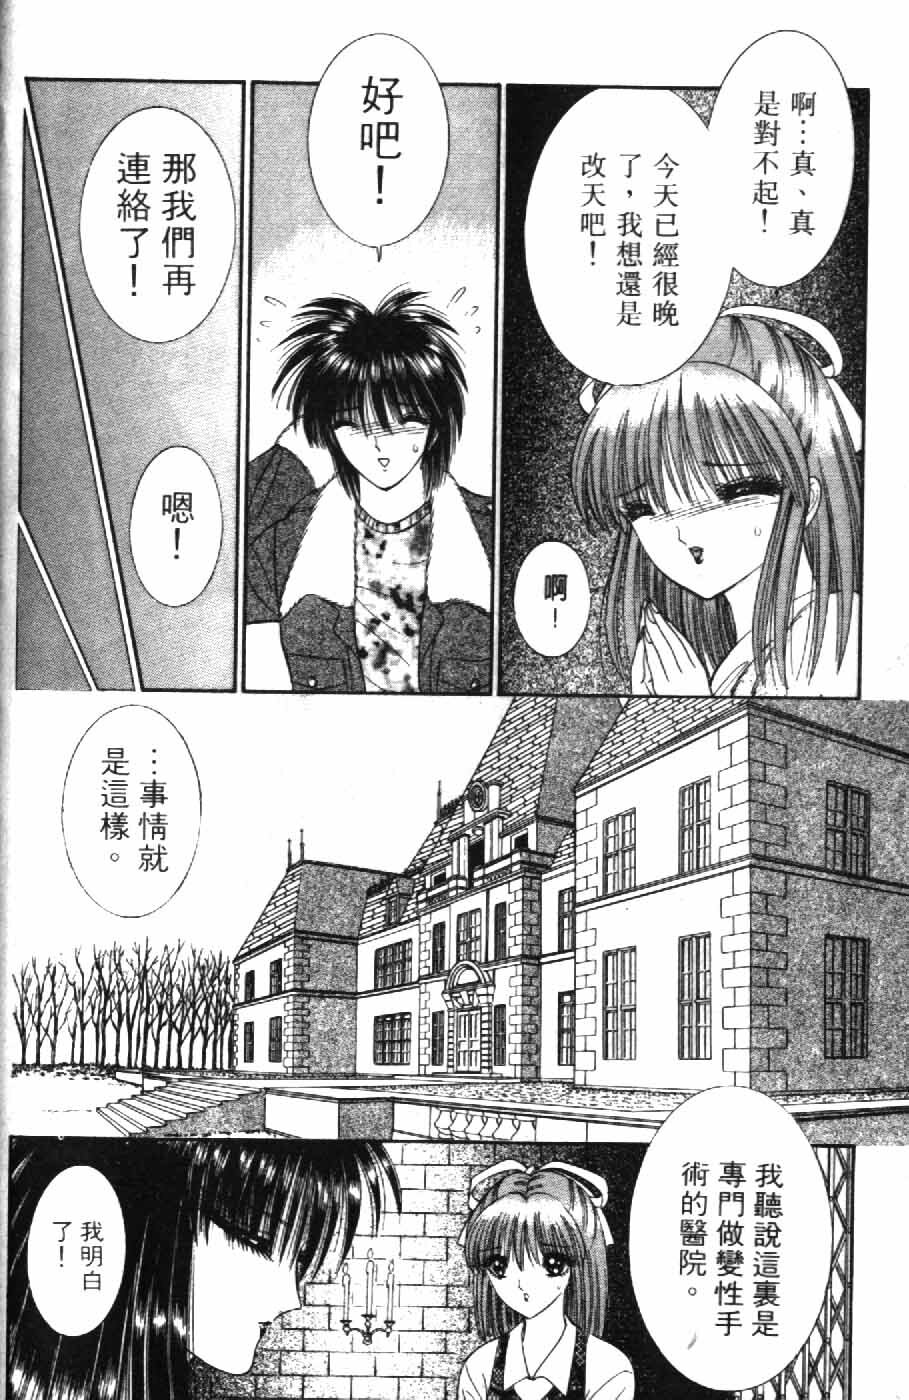 [Senno Knife] Ouma ga Horror Show 2 - Trans Sexual Special Show 2 | 顫慄博覽會 2 [Chinese] page 32 full